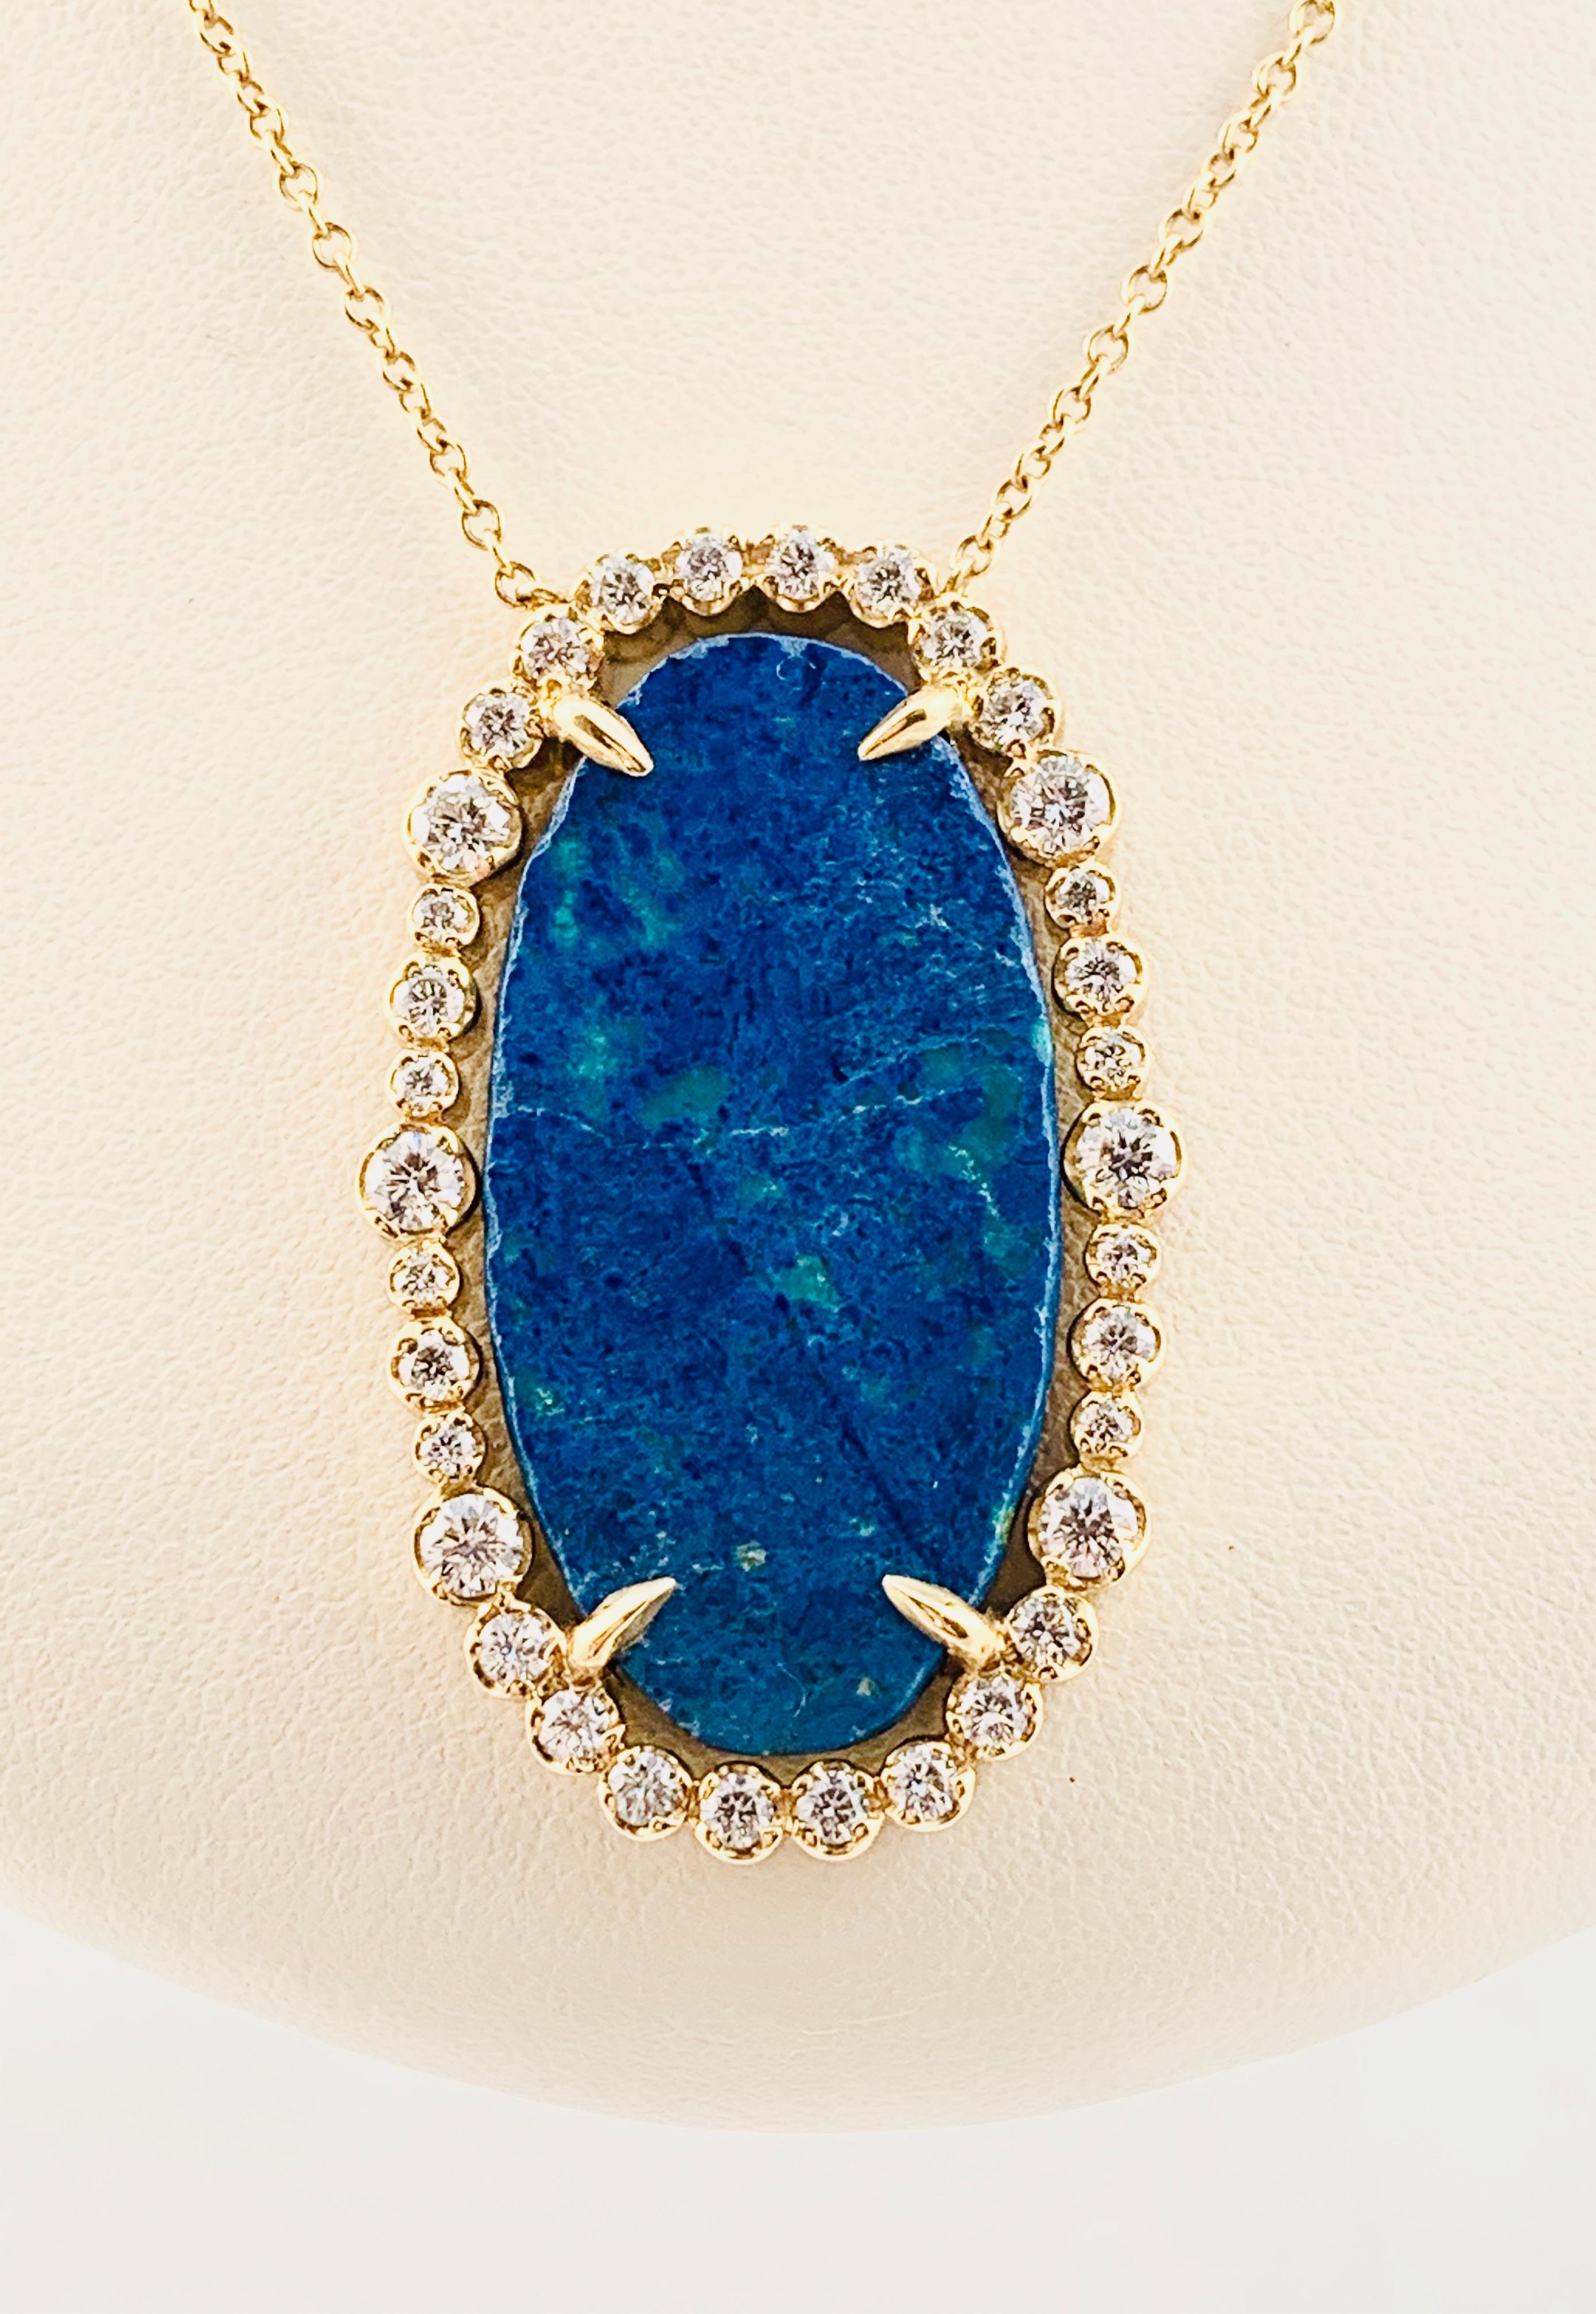 Absolutely Stunning designer necklace! This piece is made in 18k yellow Gold and Features a single, oval, 12 carat center Azurite Stone that is surrounded by 34 Brilliant diamonds. The diamonds are H-I in color and Vs2 in clarity. The diamonds have